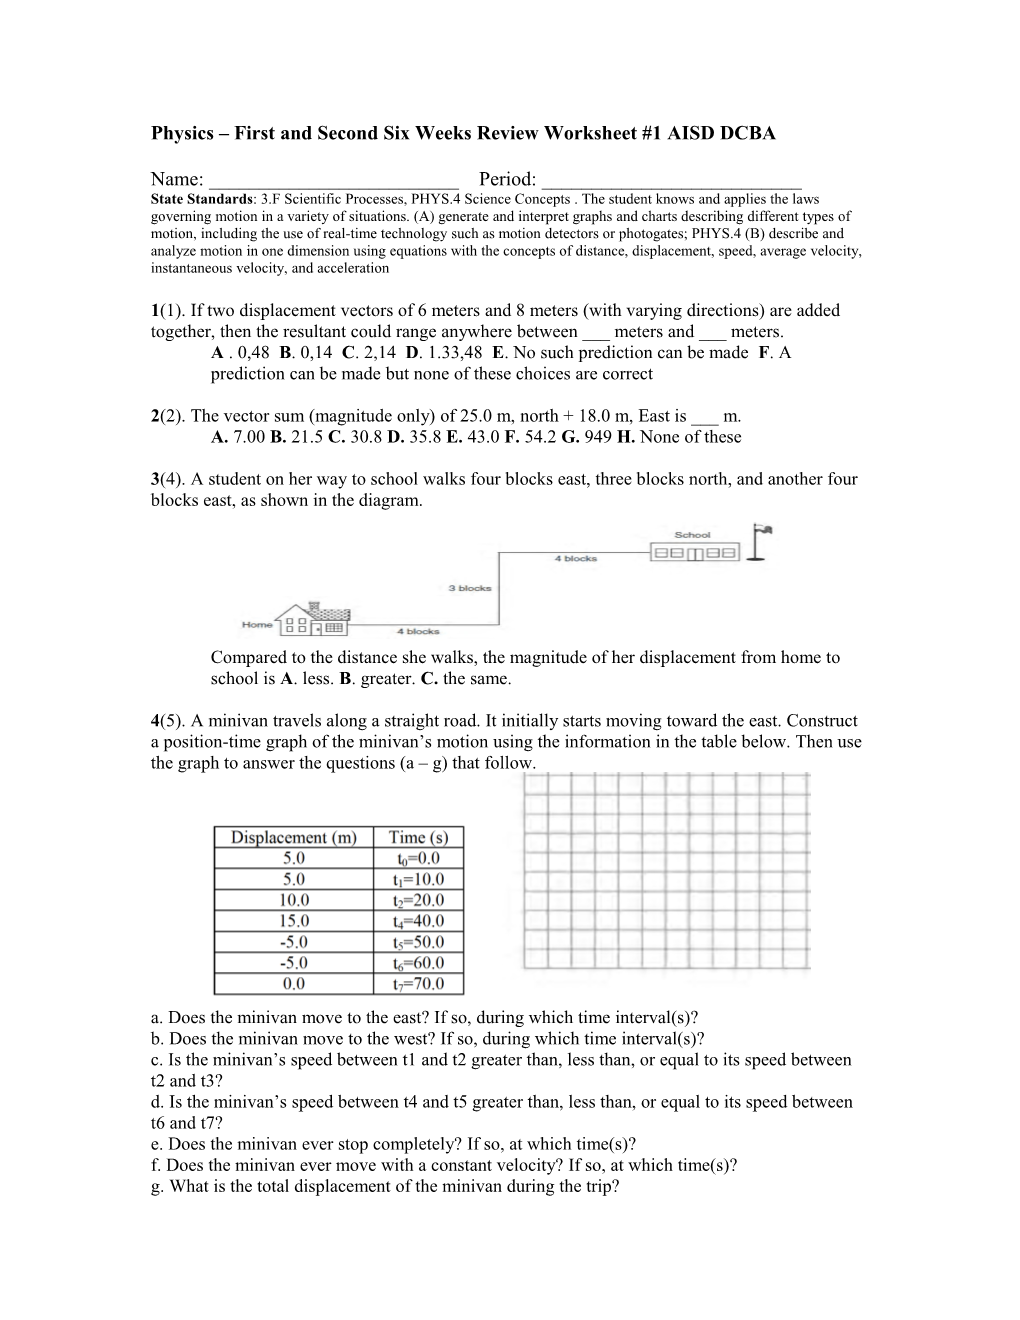 Physics First and Second Six Weeks Review Worksheet #1 AISD DCBA